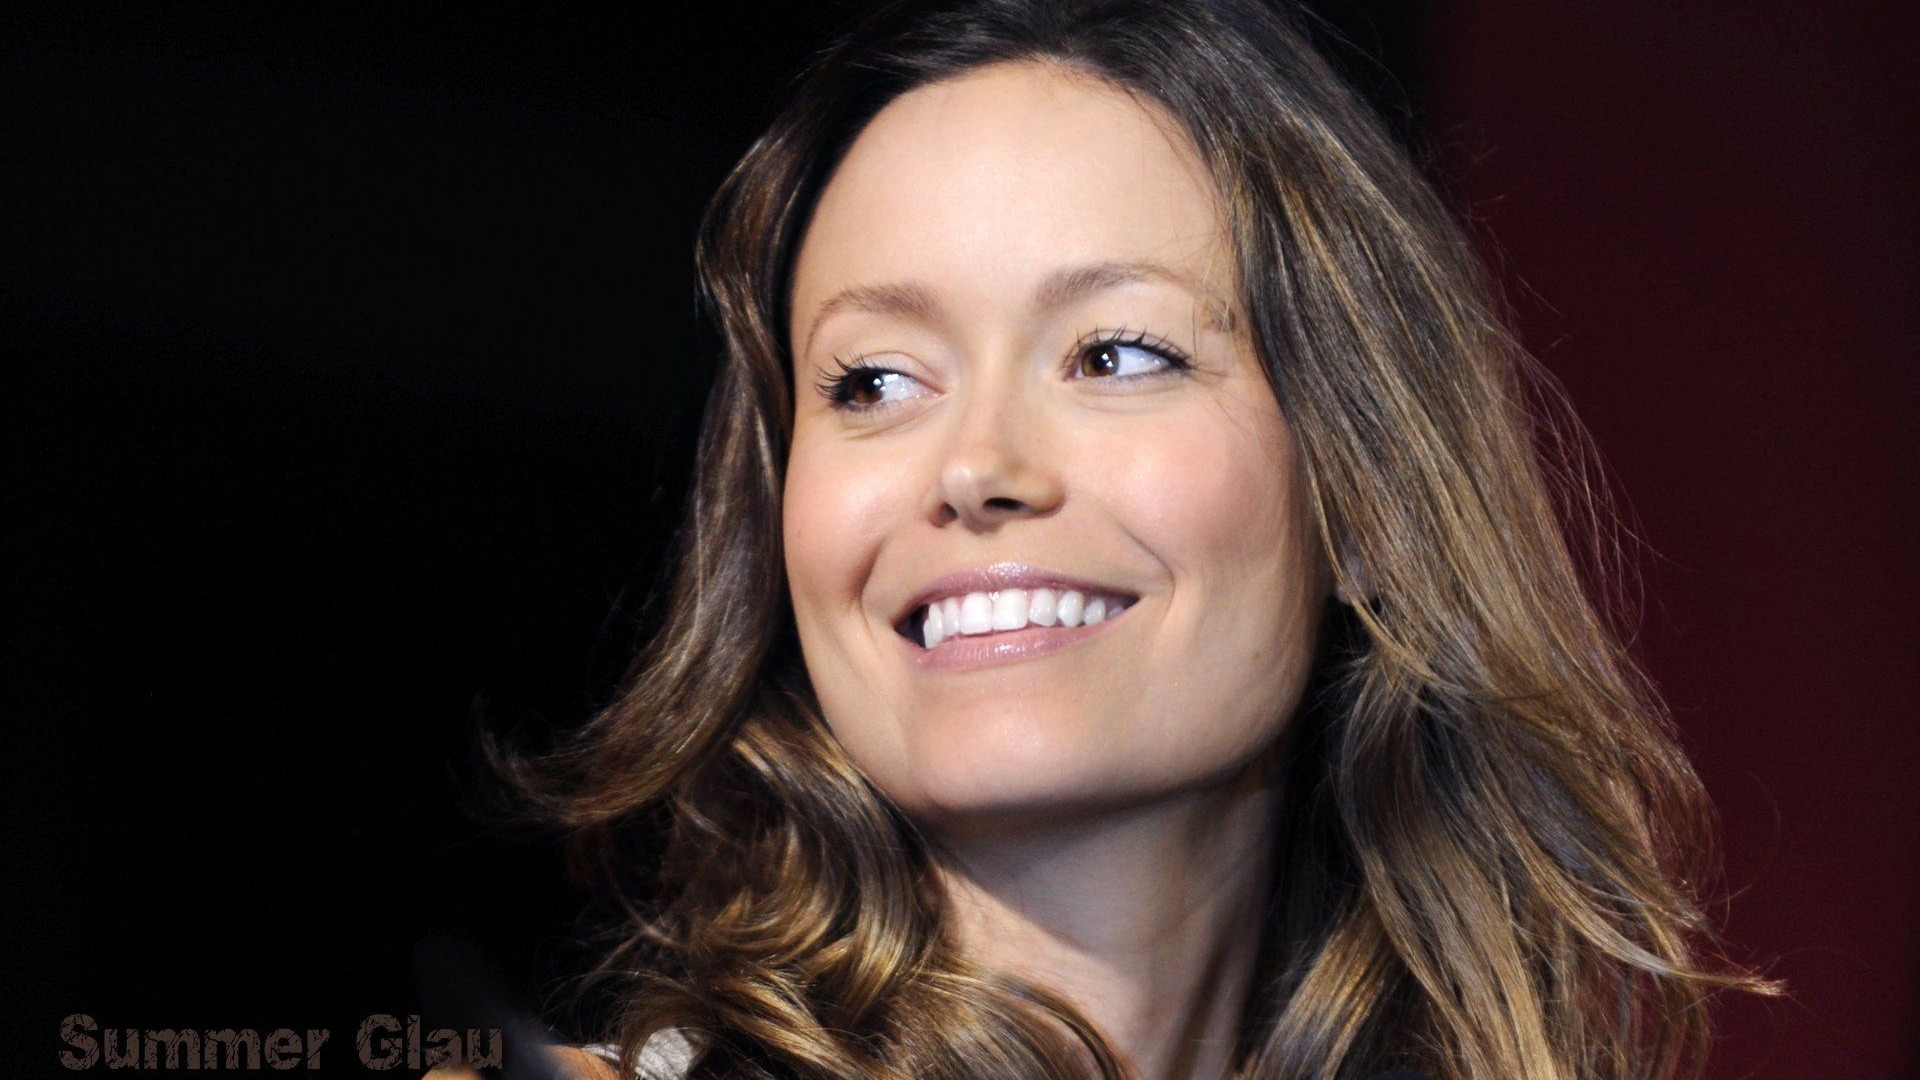 Summer Glau #018 - 1920x1080 Wallpapers Pictures Photos Images